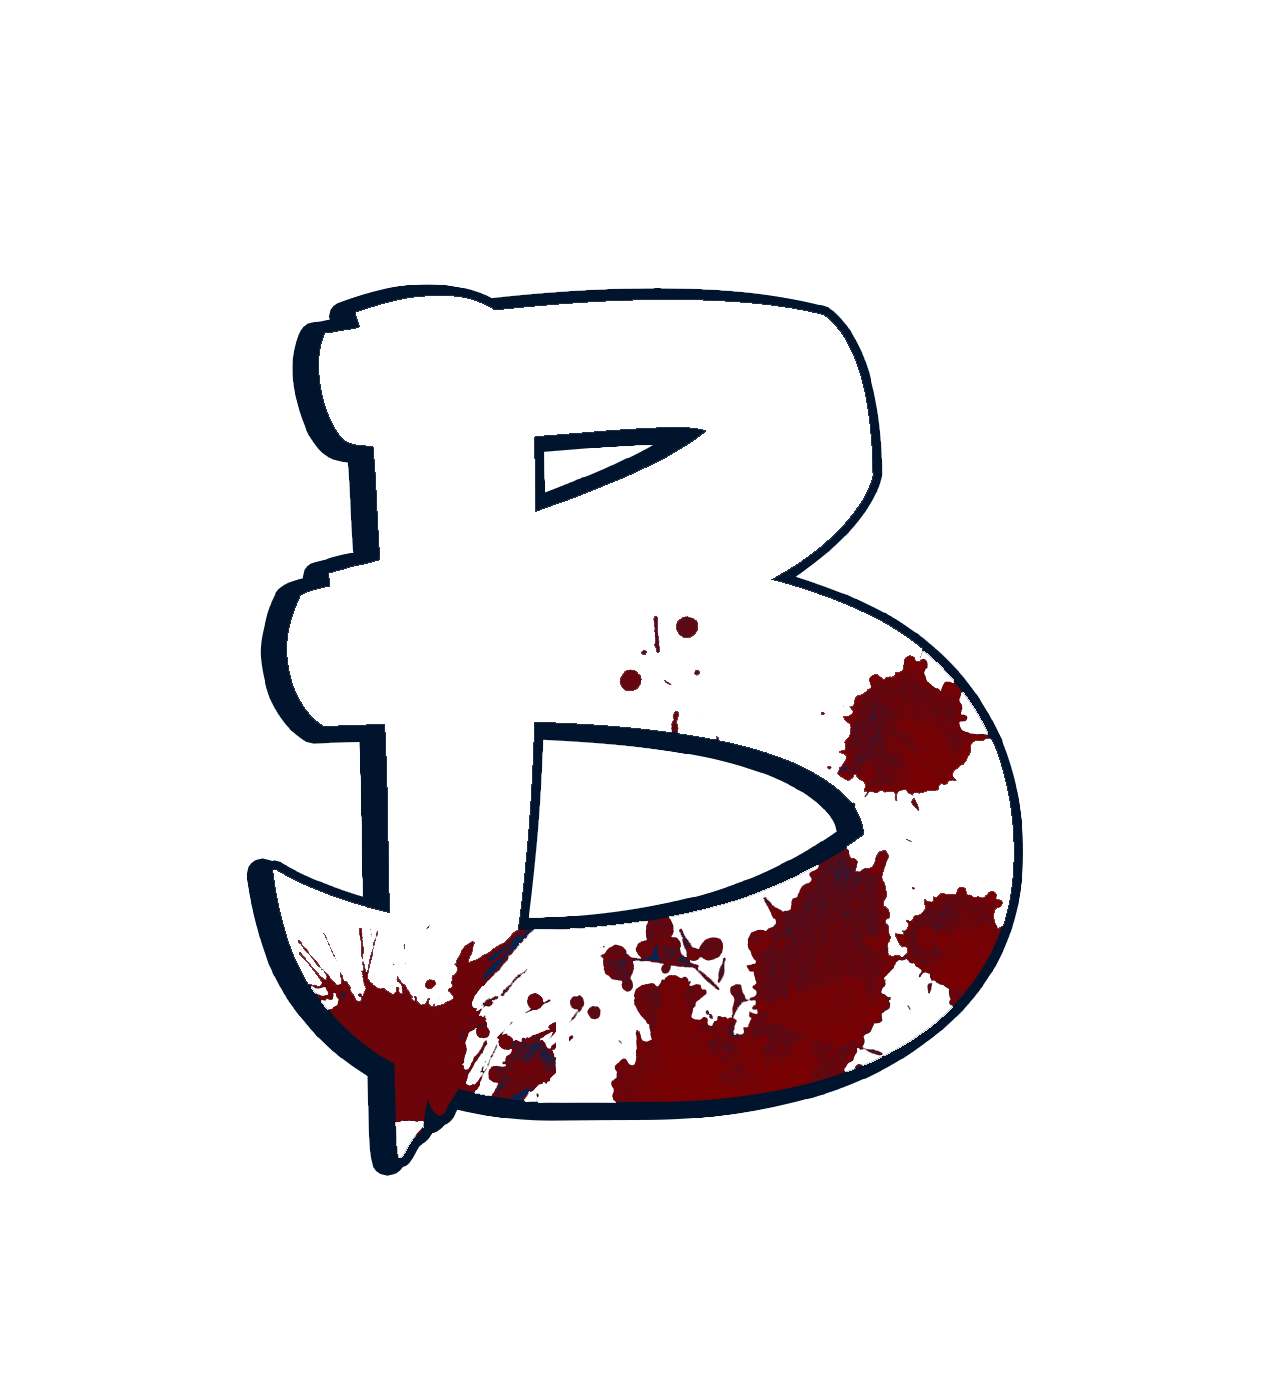 Clients can expect to see a blood-splattered letter b as part of the visual design.